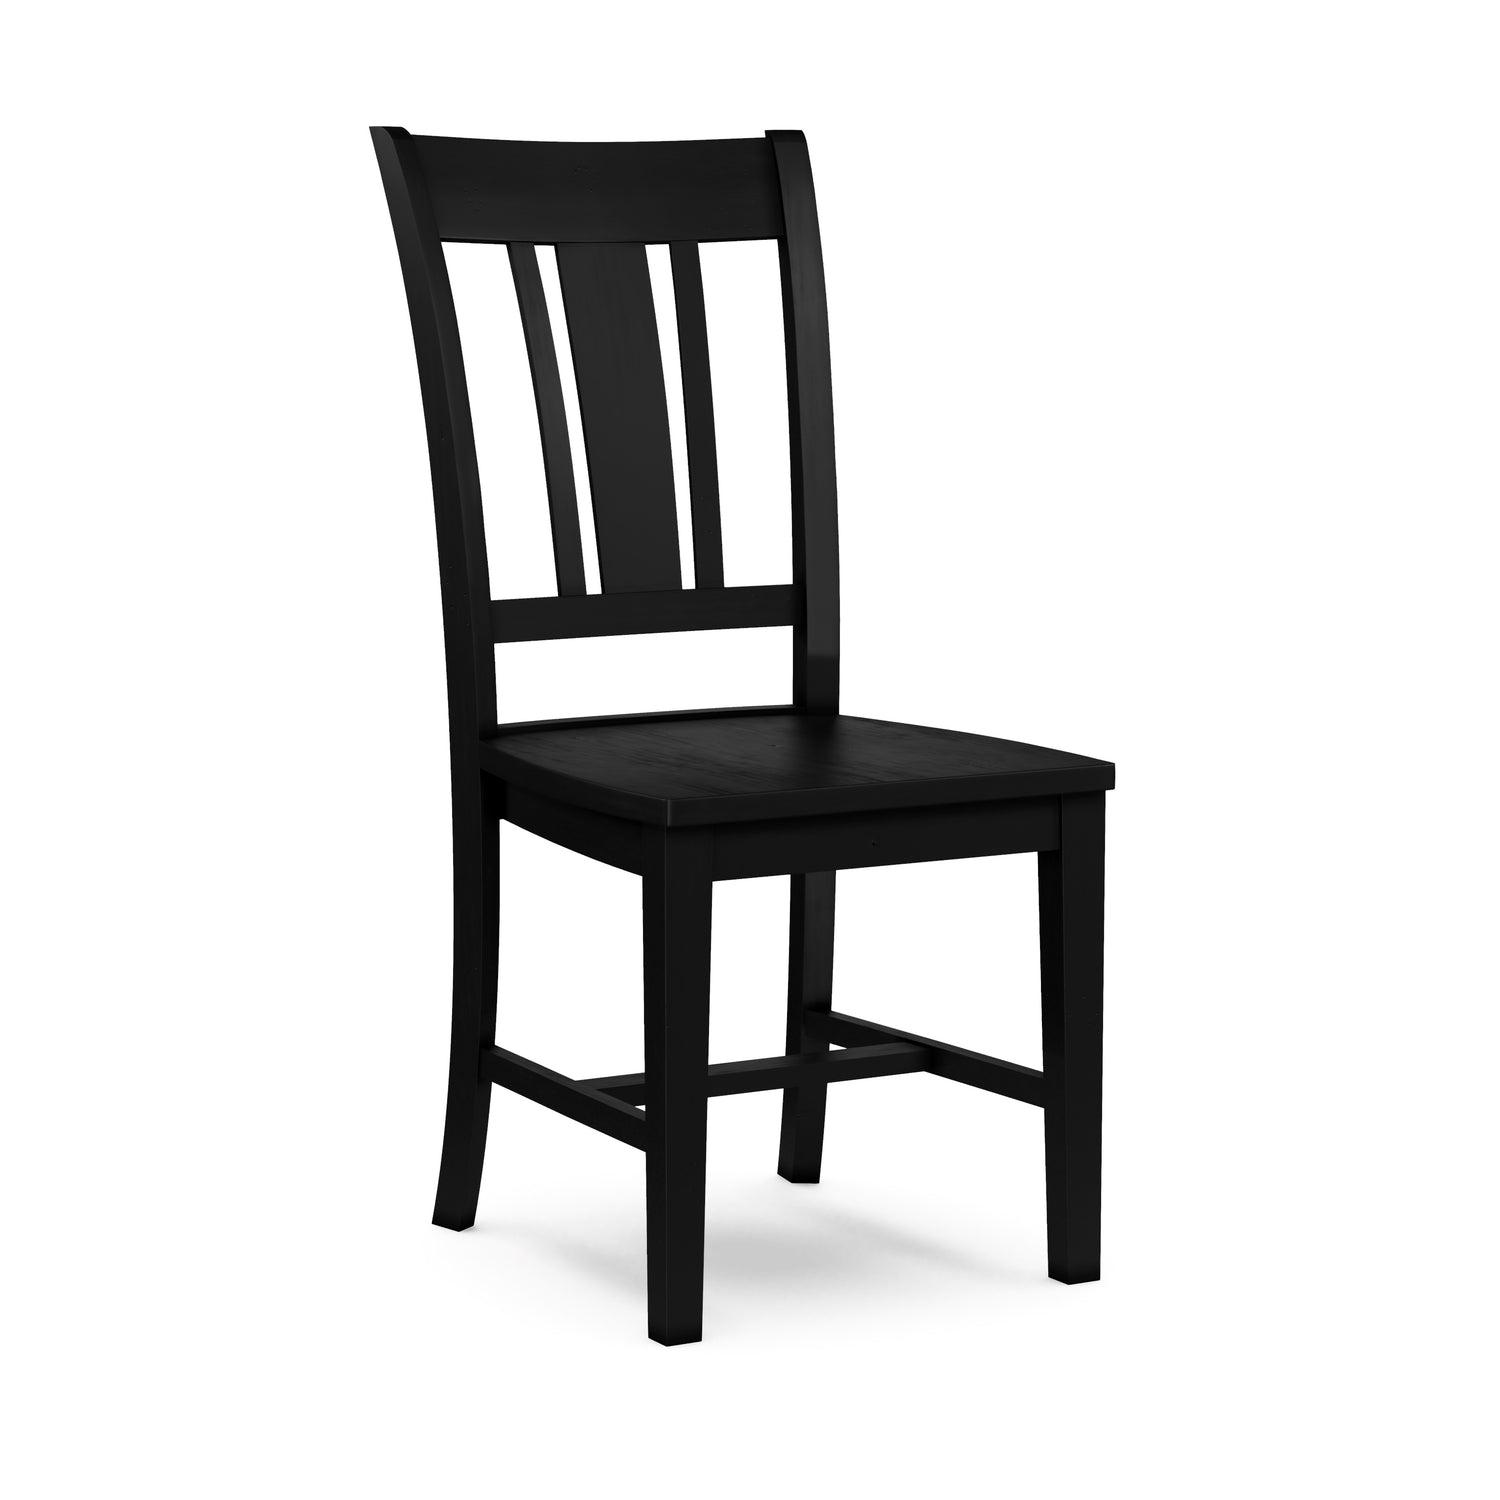 The San Remo Chair